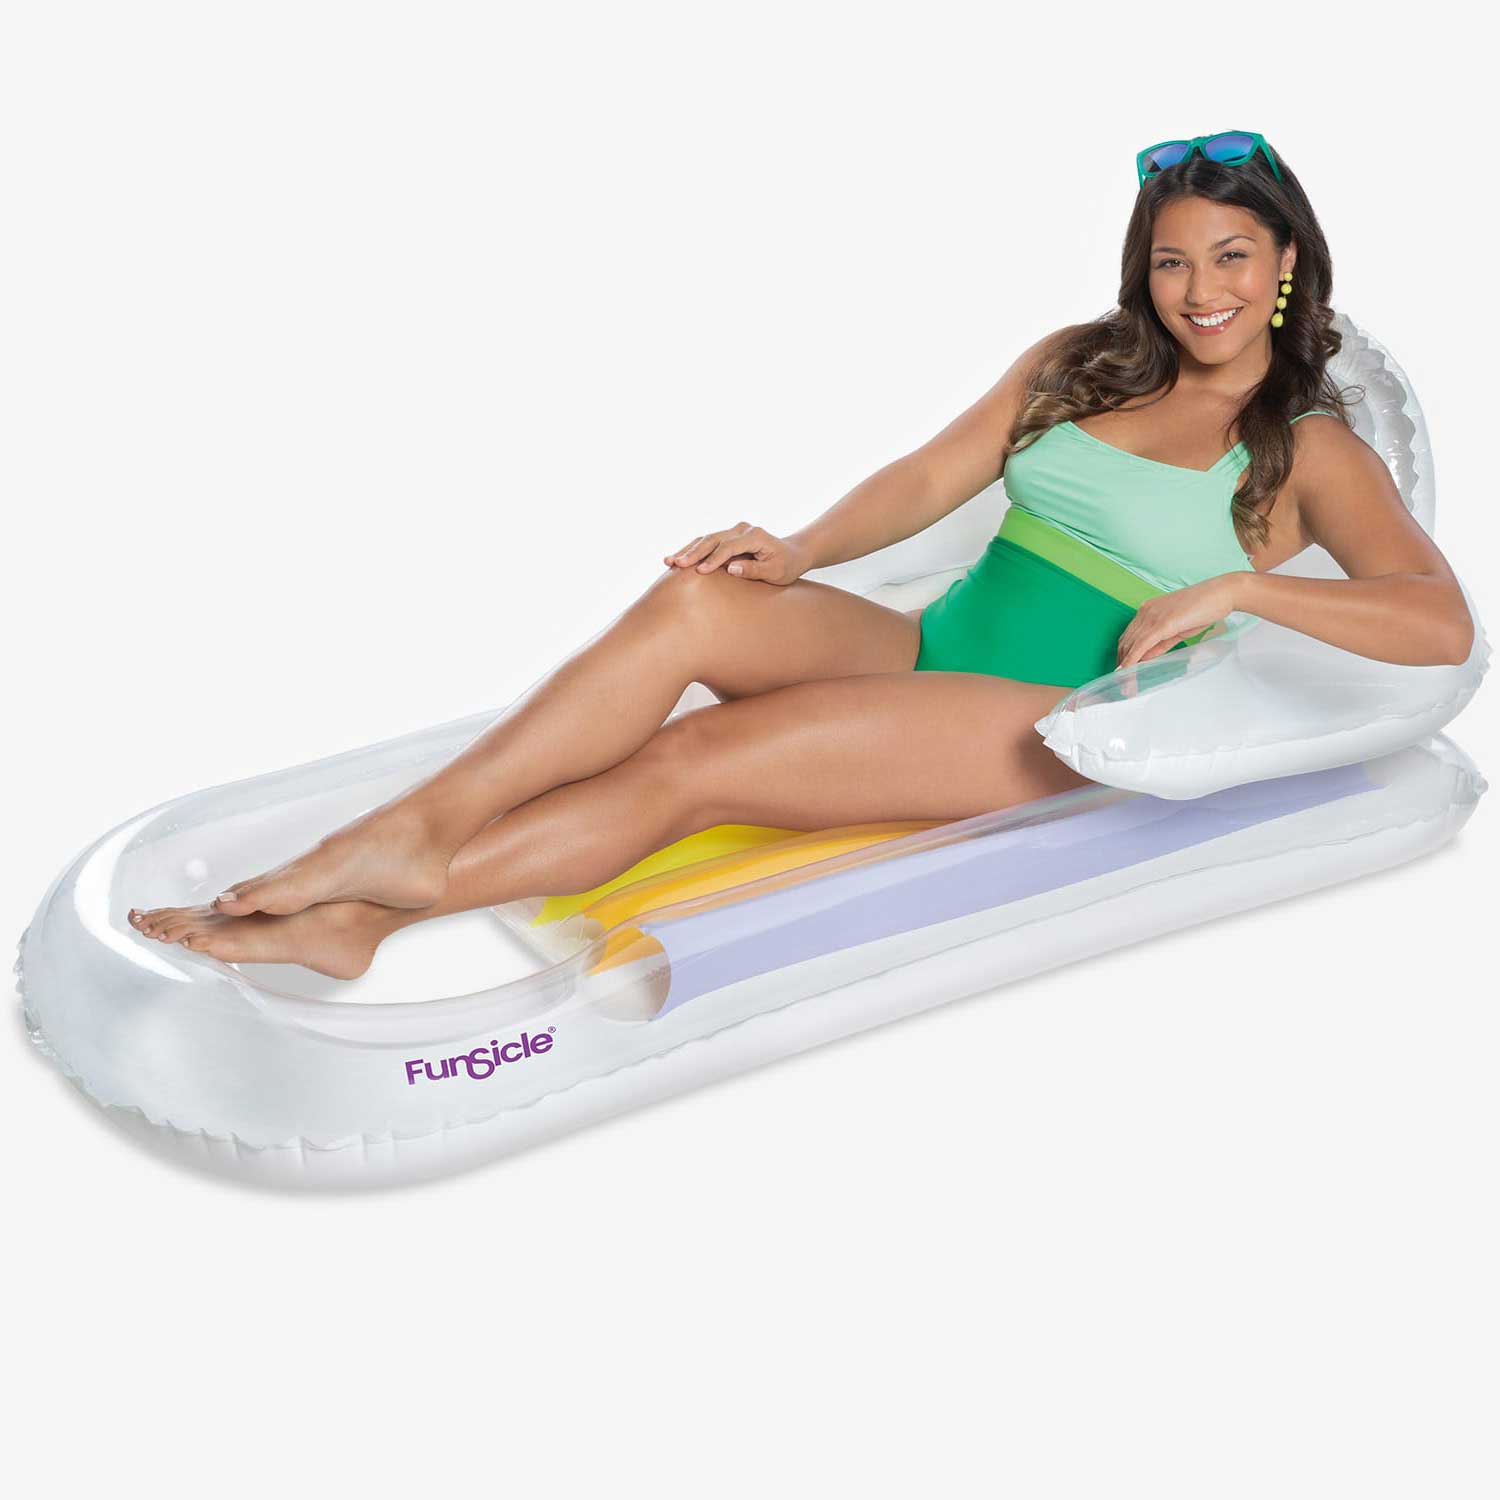 a model lounging on Funsicle Relaxing Lounge on white bacgkround